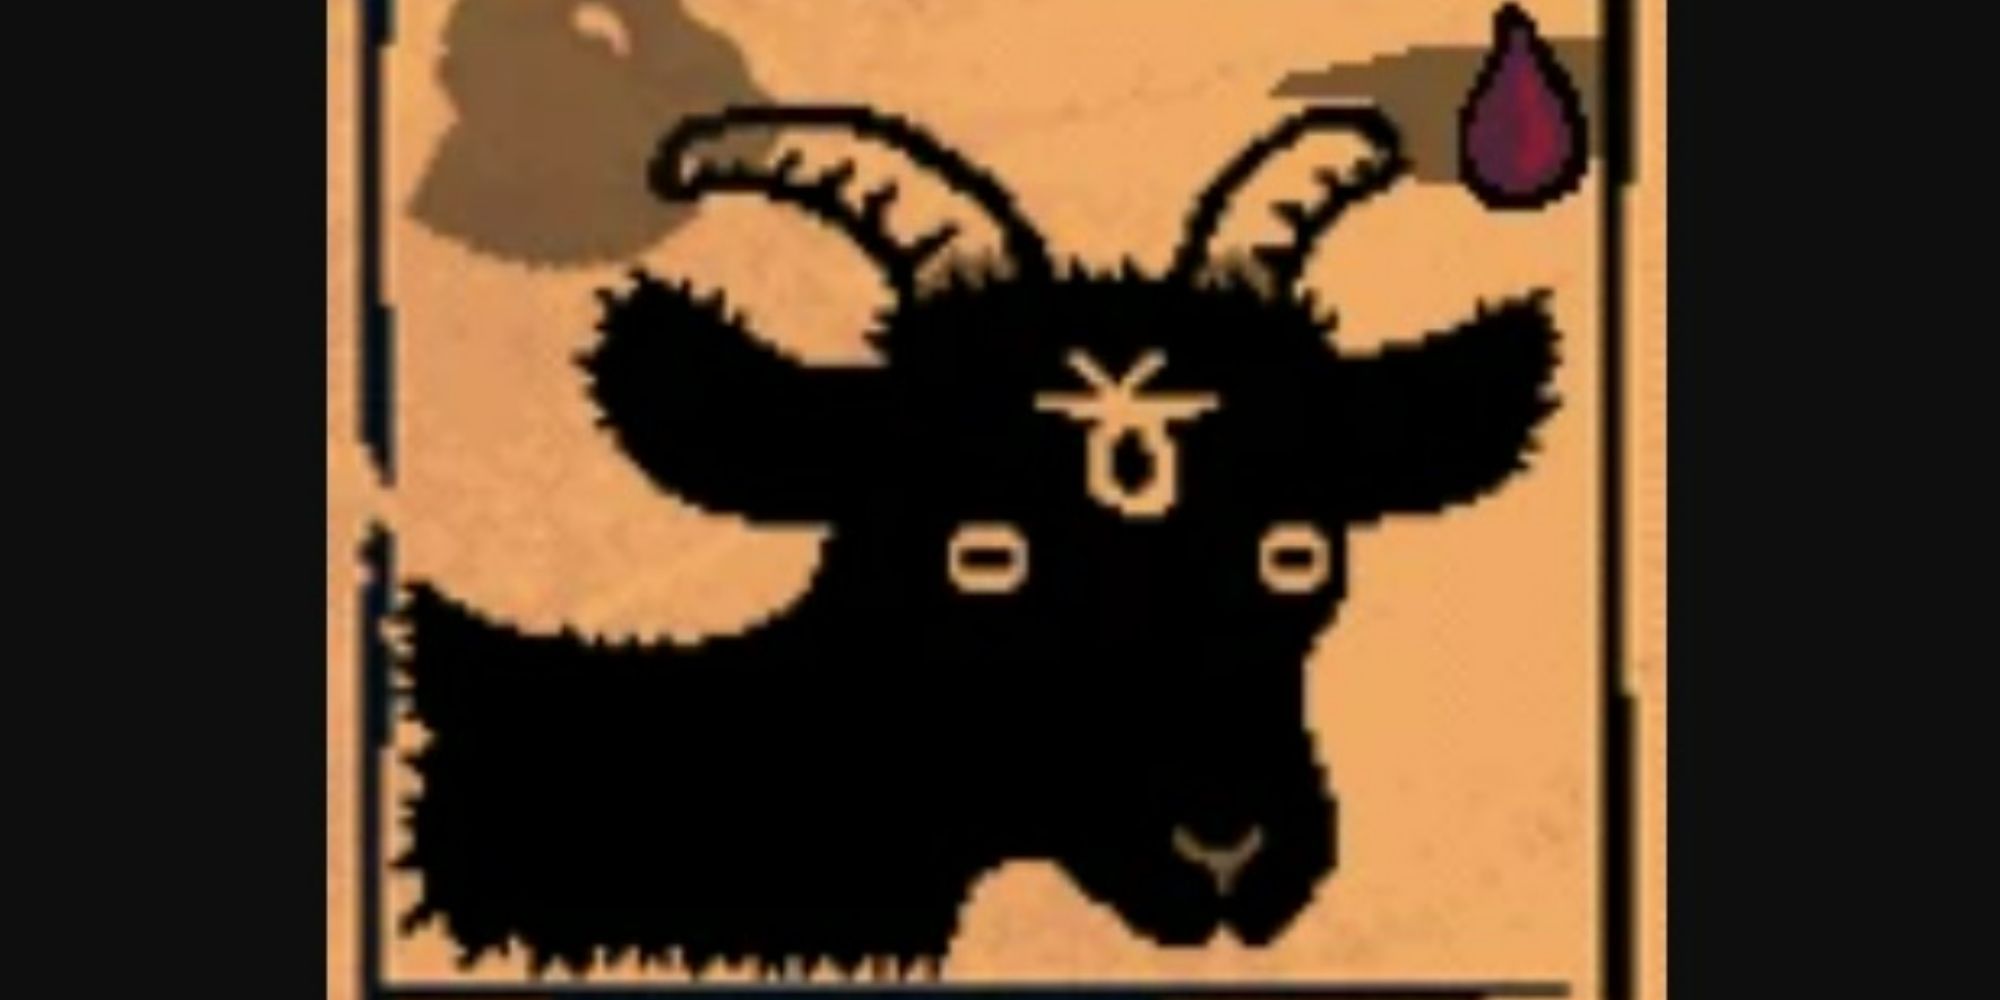 The Black Goat from Inscryption